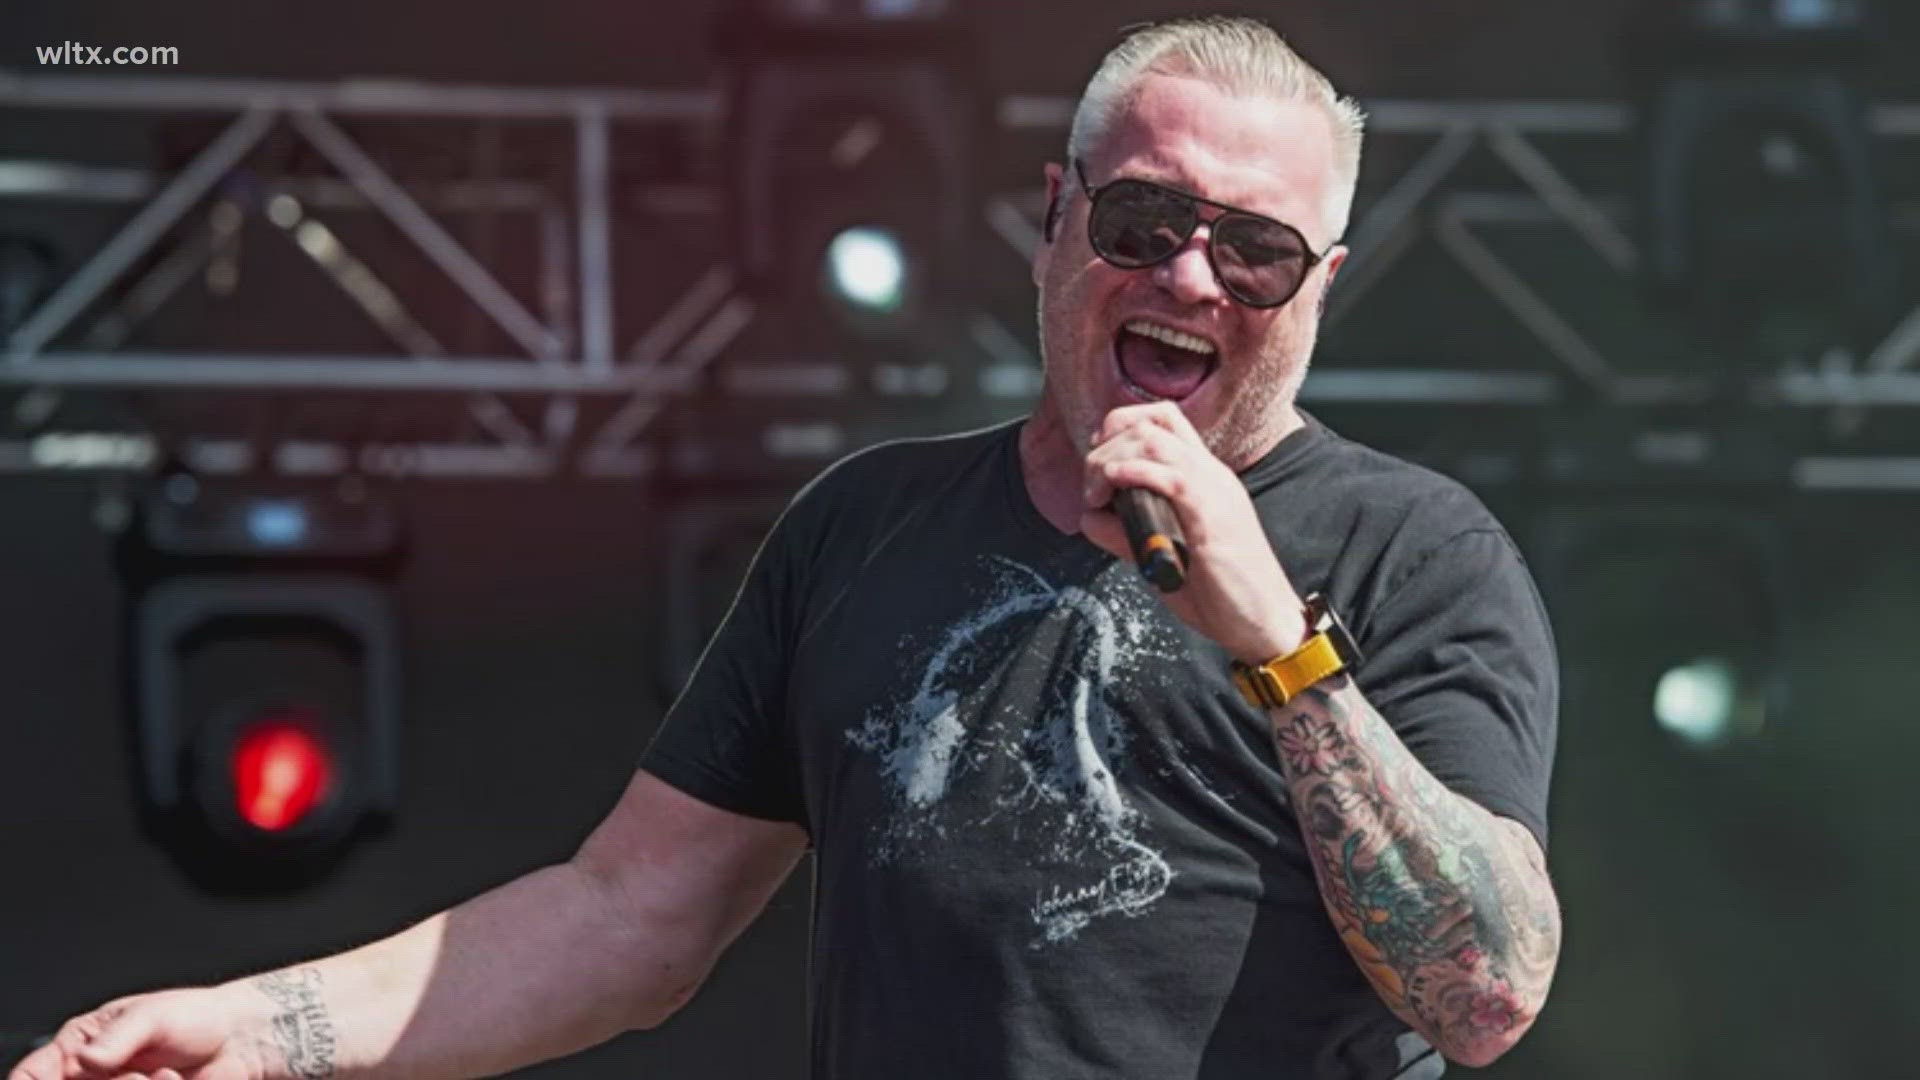 Steve Harwell, the founding vocalist of Smash Mouth, known for 2000s hits like "All Star" and "I'm a Believer," has died. He was 56.